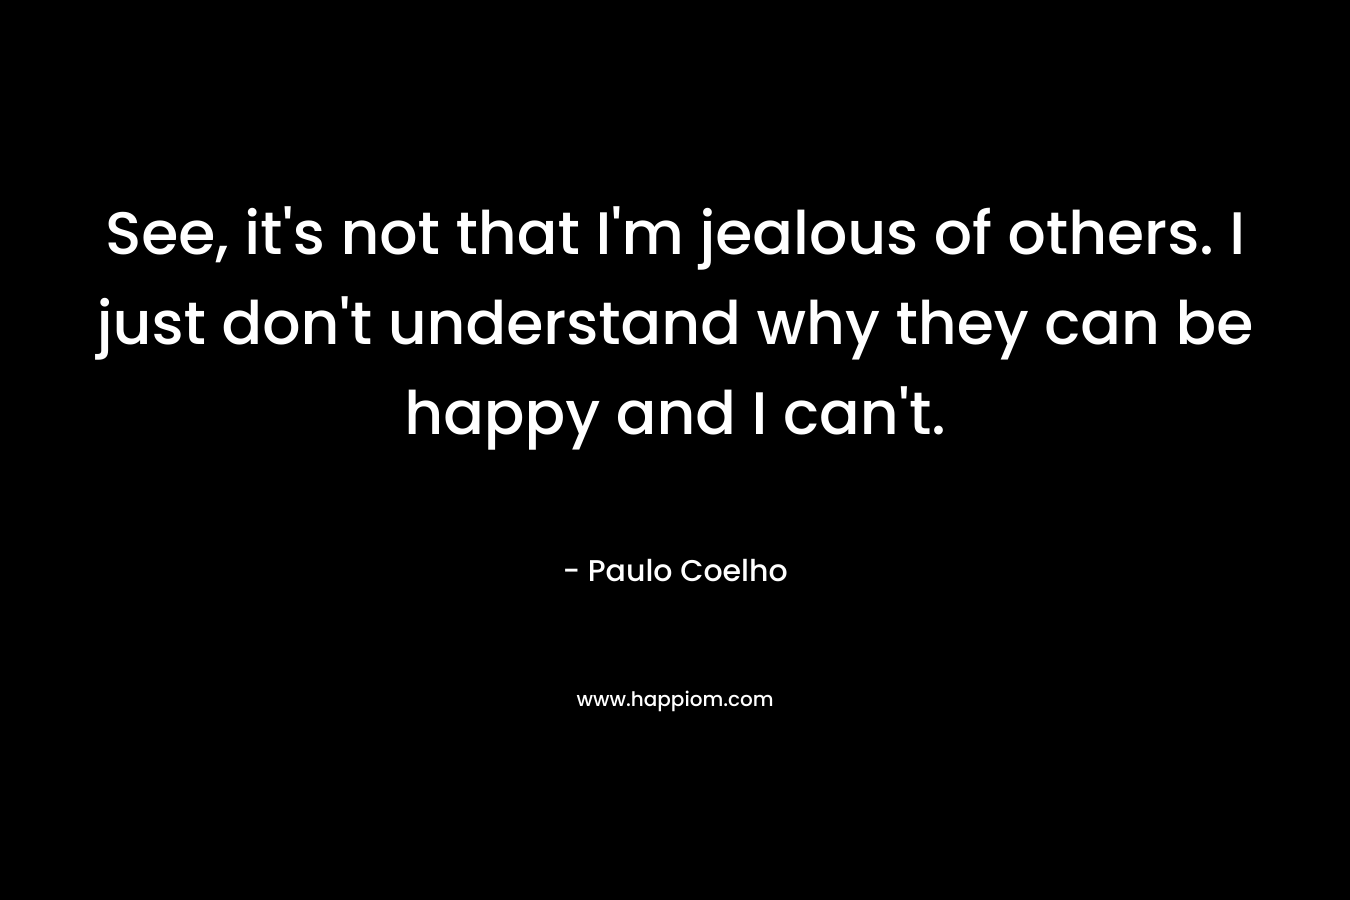 See, it's not that I'm jealous of others. I just don't understand why they can be happy and I can't.